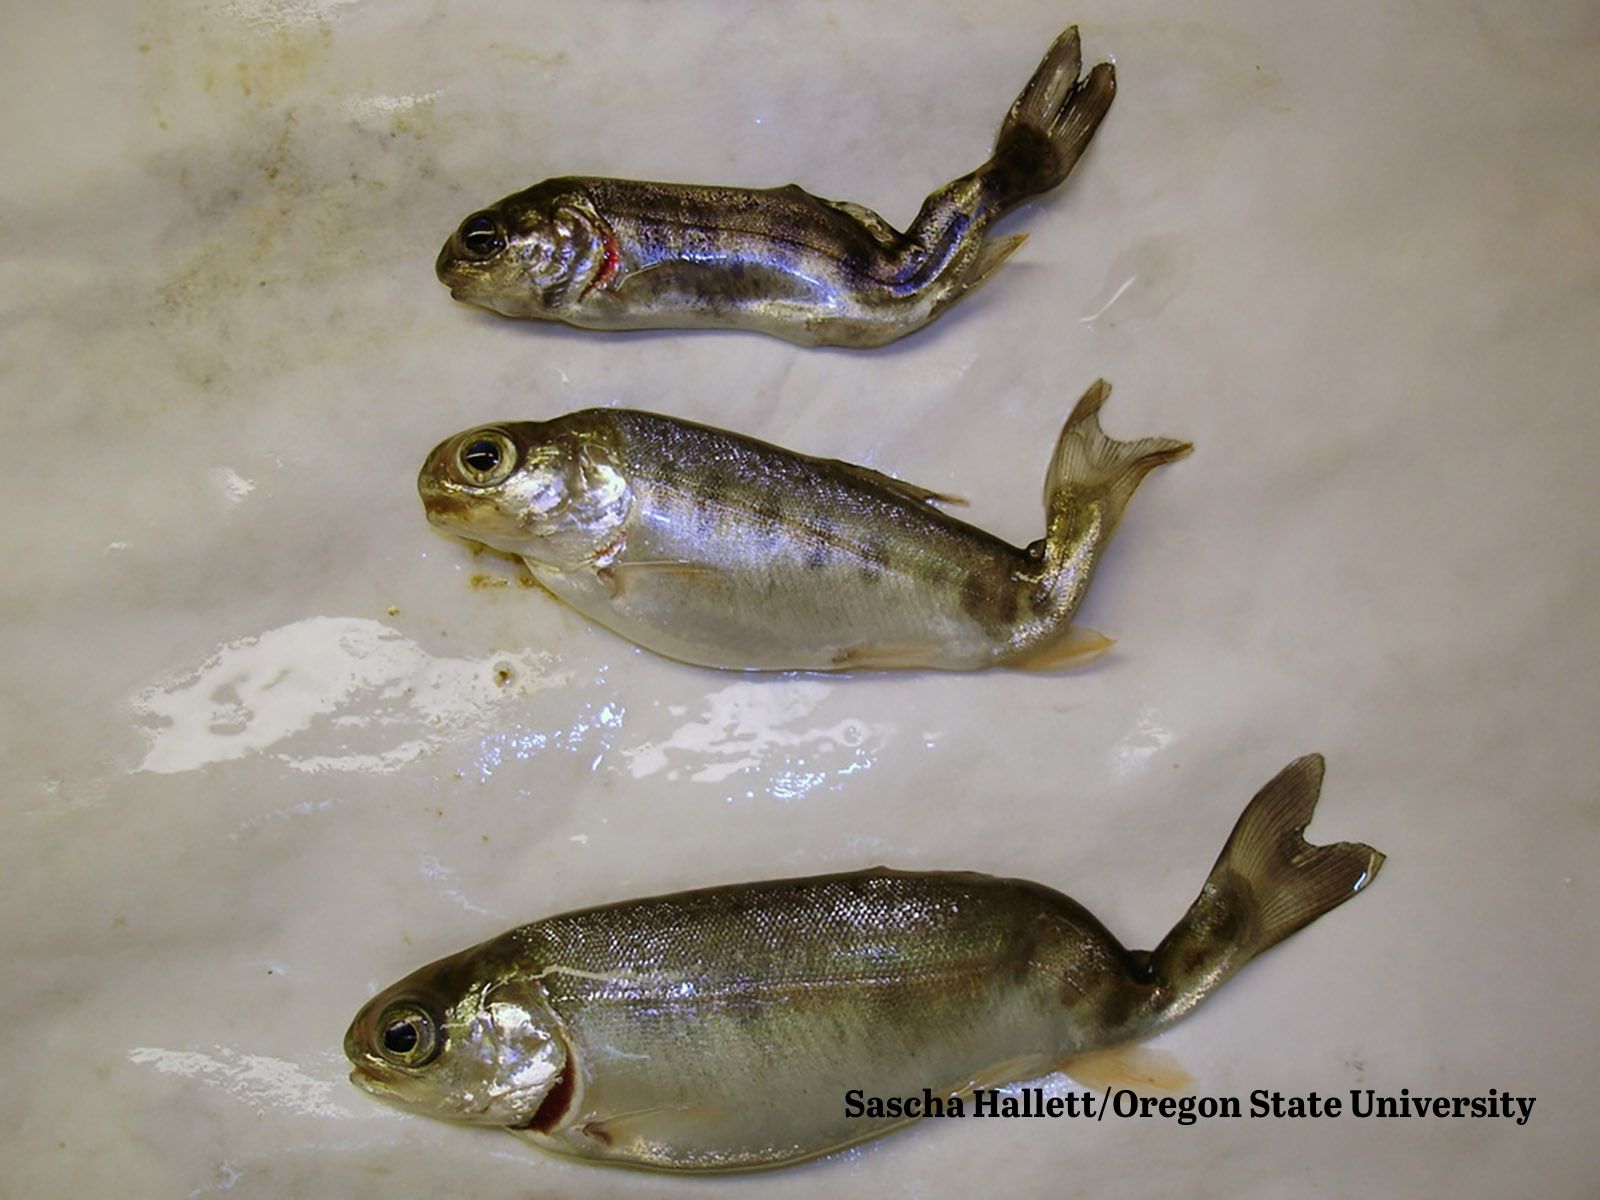 Three small rainbow trout against a white background, displaying the bent, deformed tails symptomatic of whirling disease.